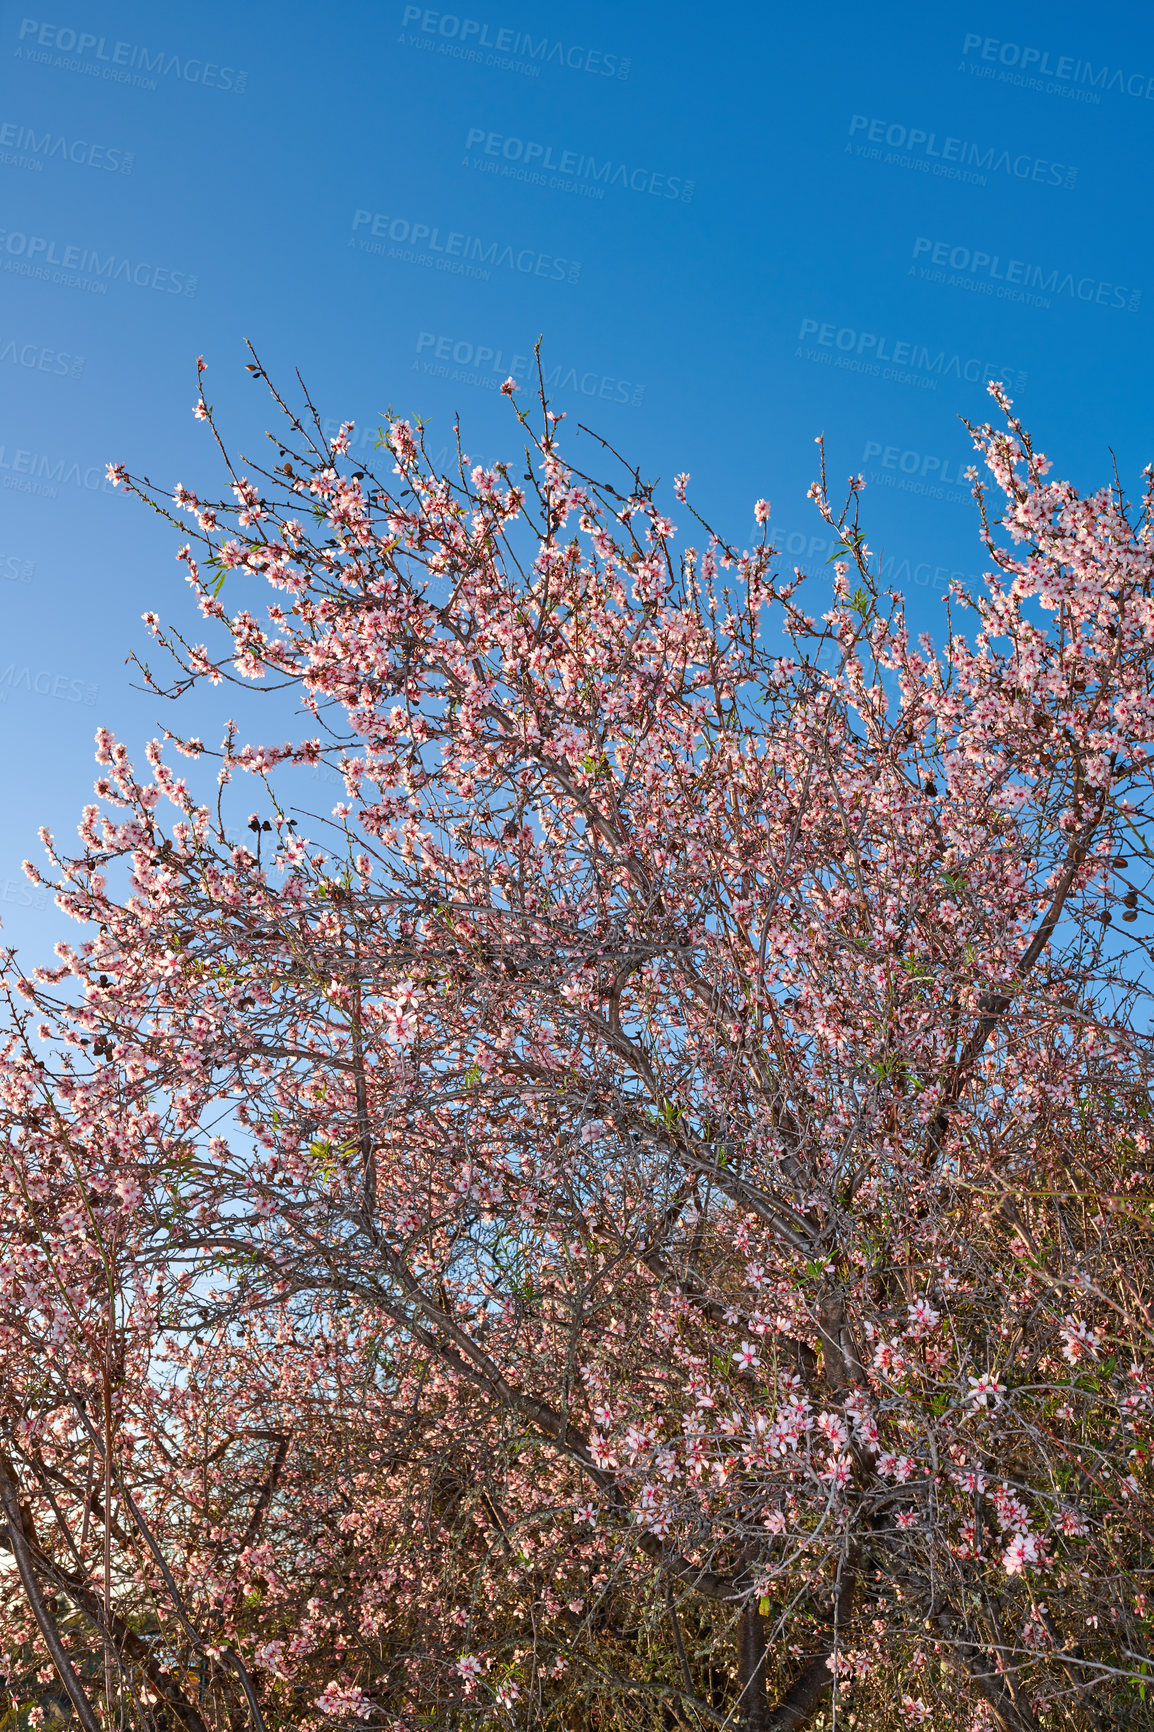 Buy stock photo Almond tree with pink flowers growing in a garden against a clear blue sky background in La Palma, Canary islands, Spain. Beautiful and vibrant blossoms blooming in nature during a sunny spring day
